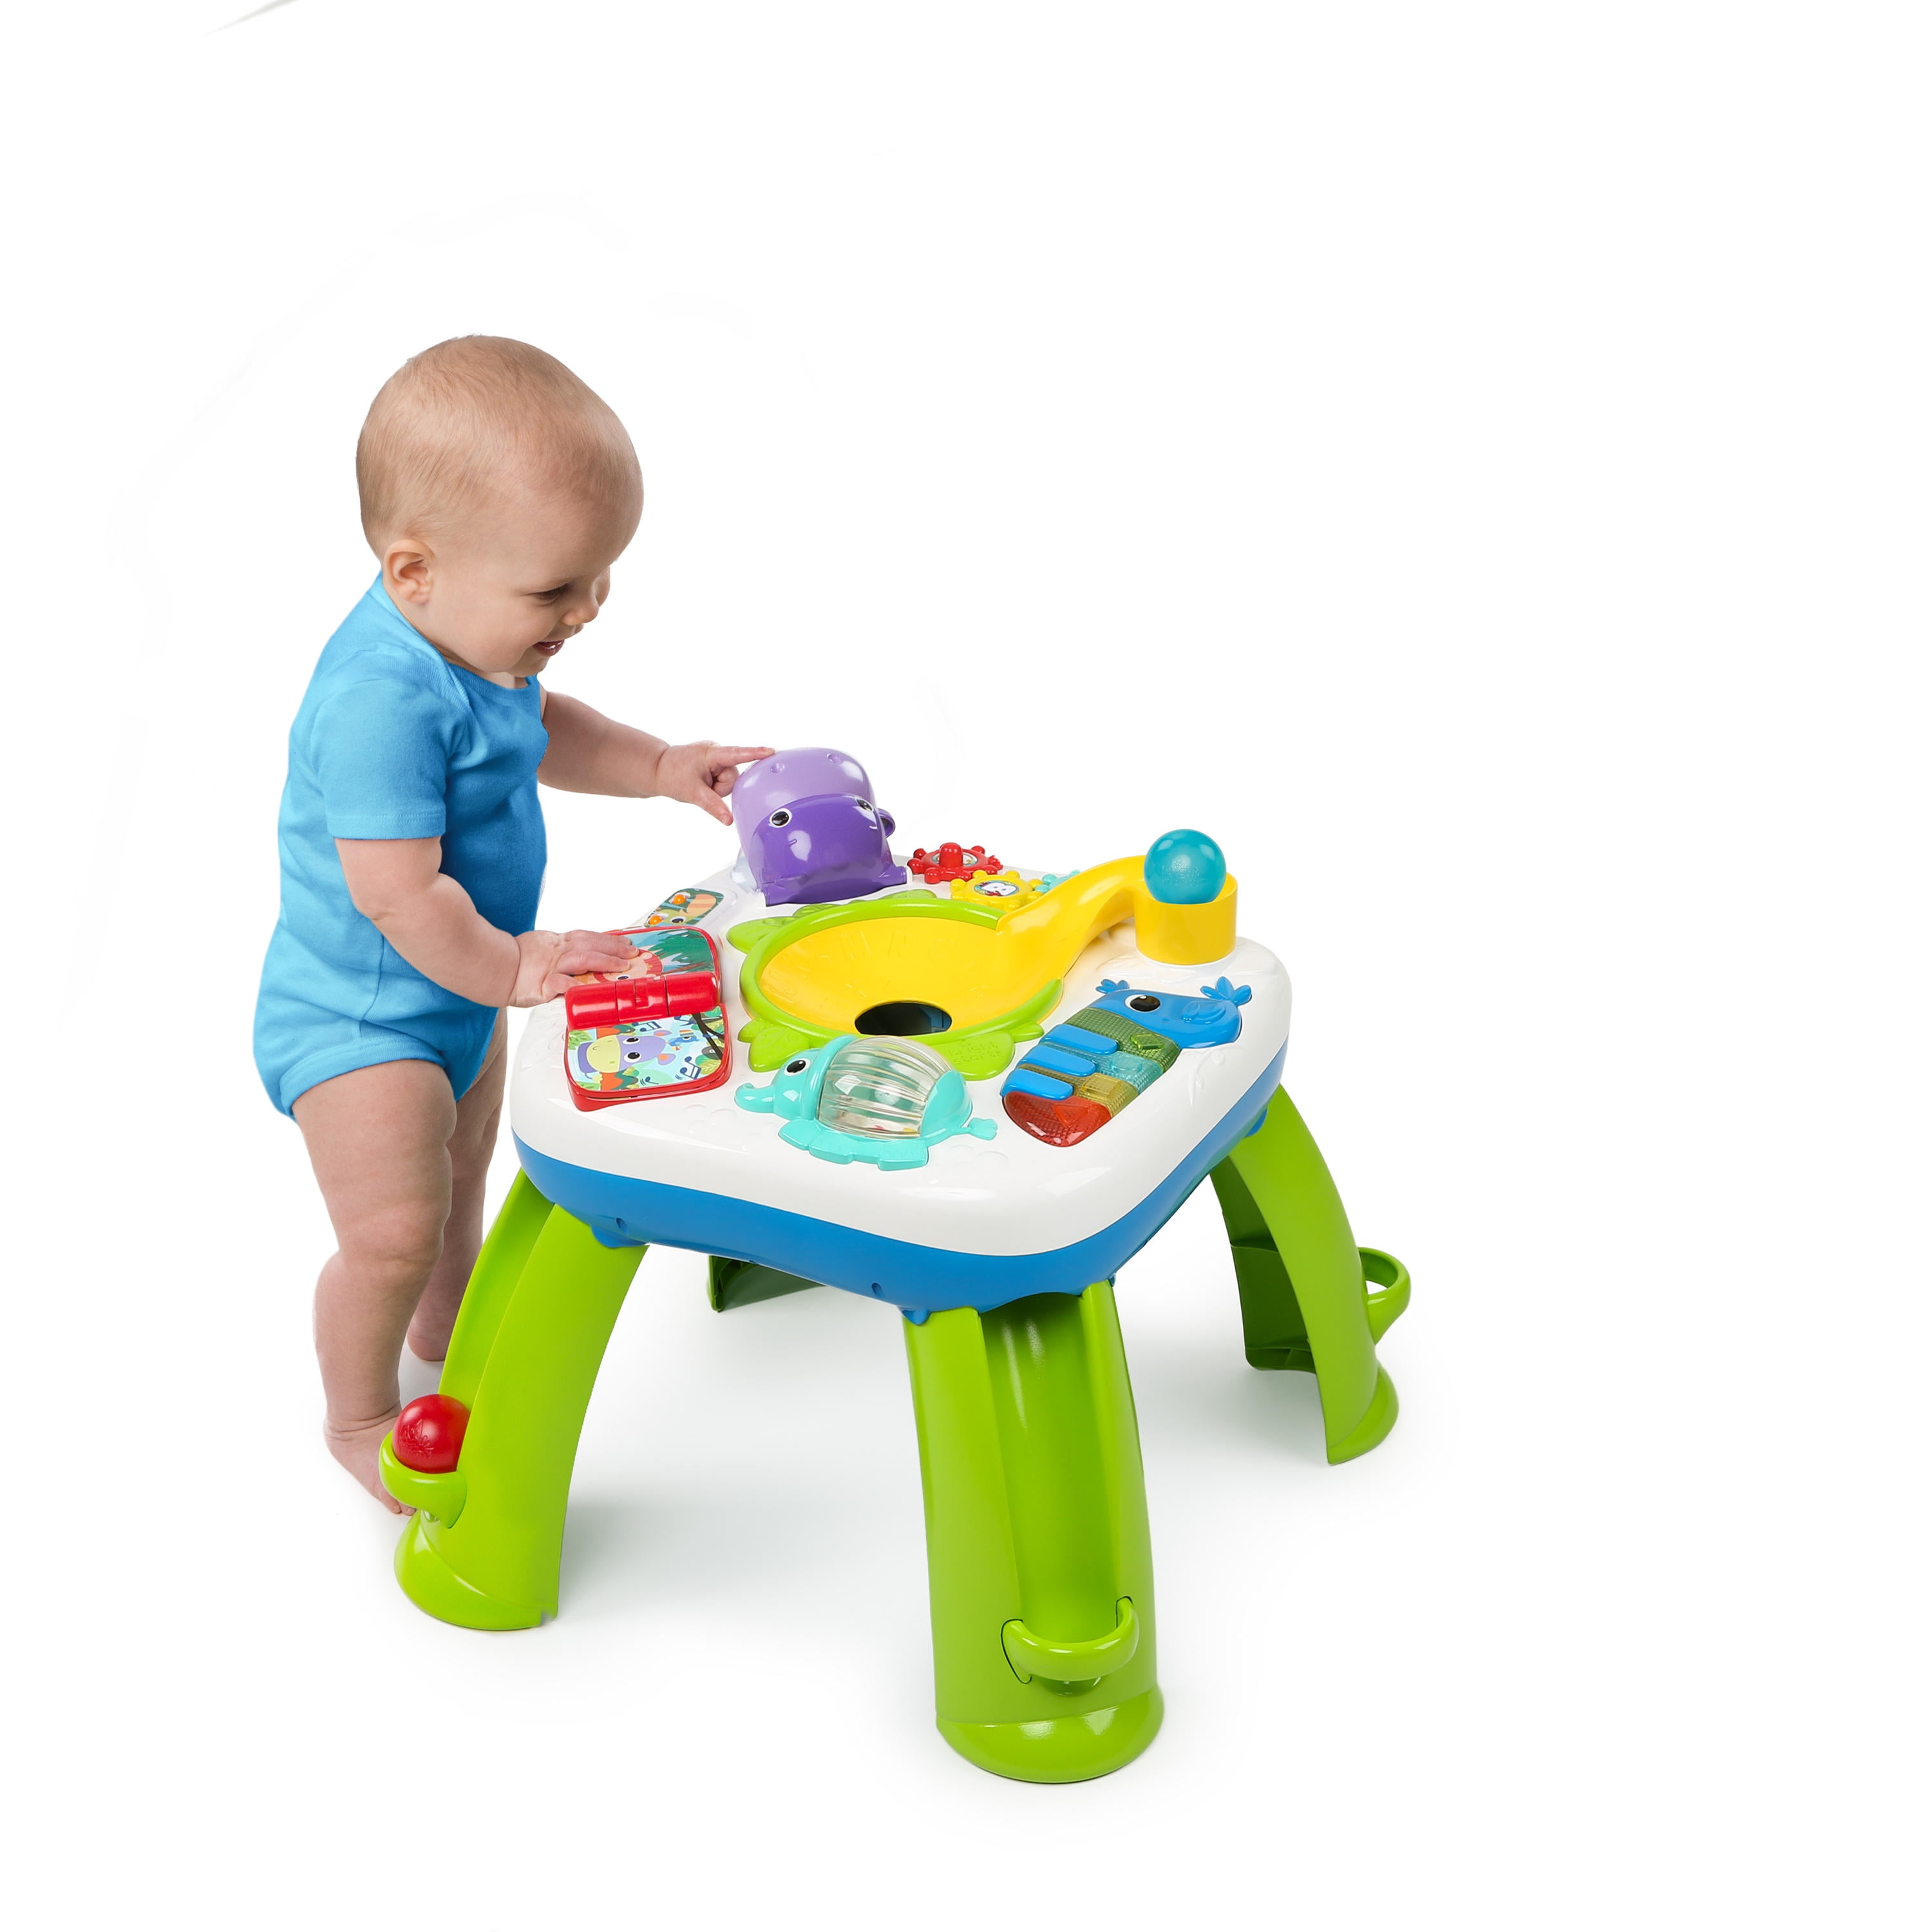 Baby Activity Table Walmart Cheap Online